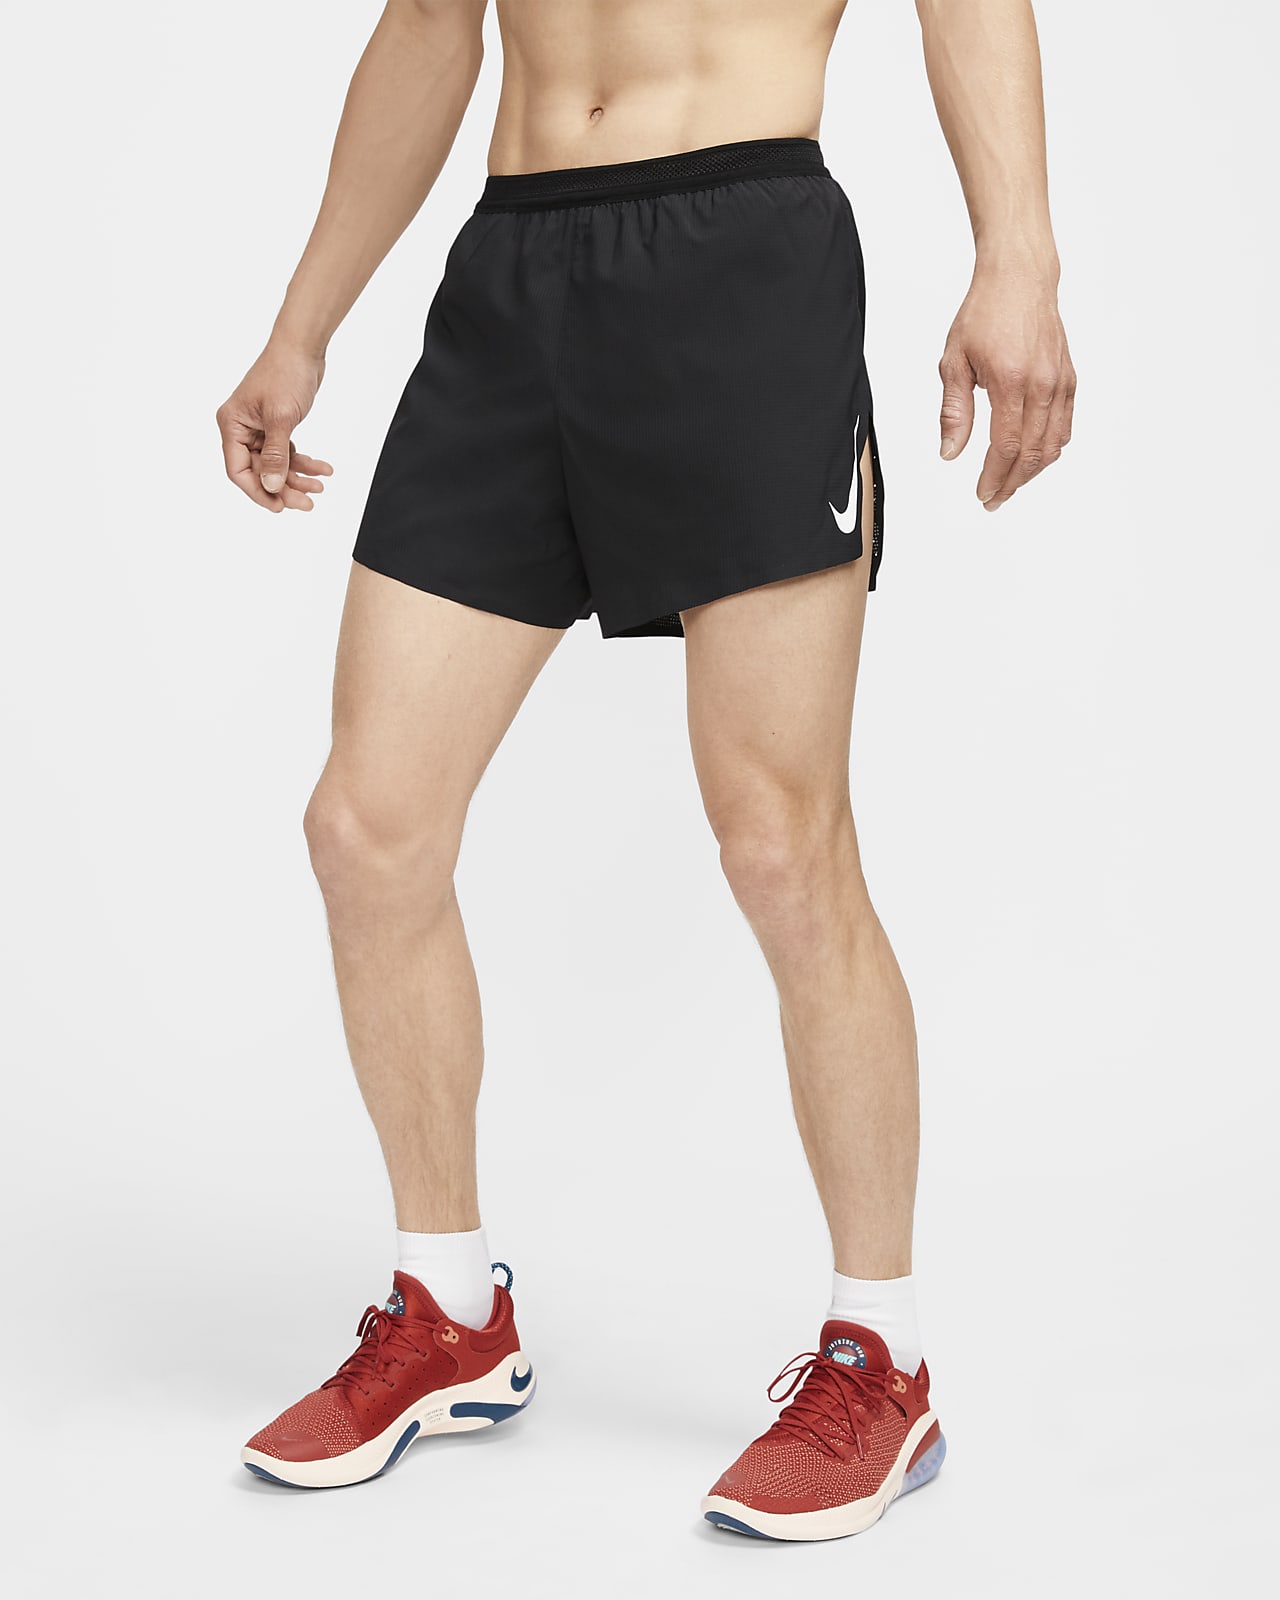 Nike Dri-FIT ADV Men's 10cm (approx.) Brief-Lined Racing Shorts. Nike